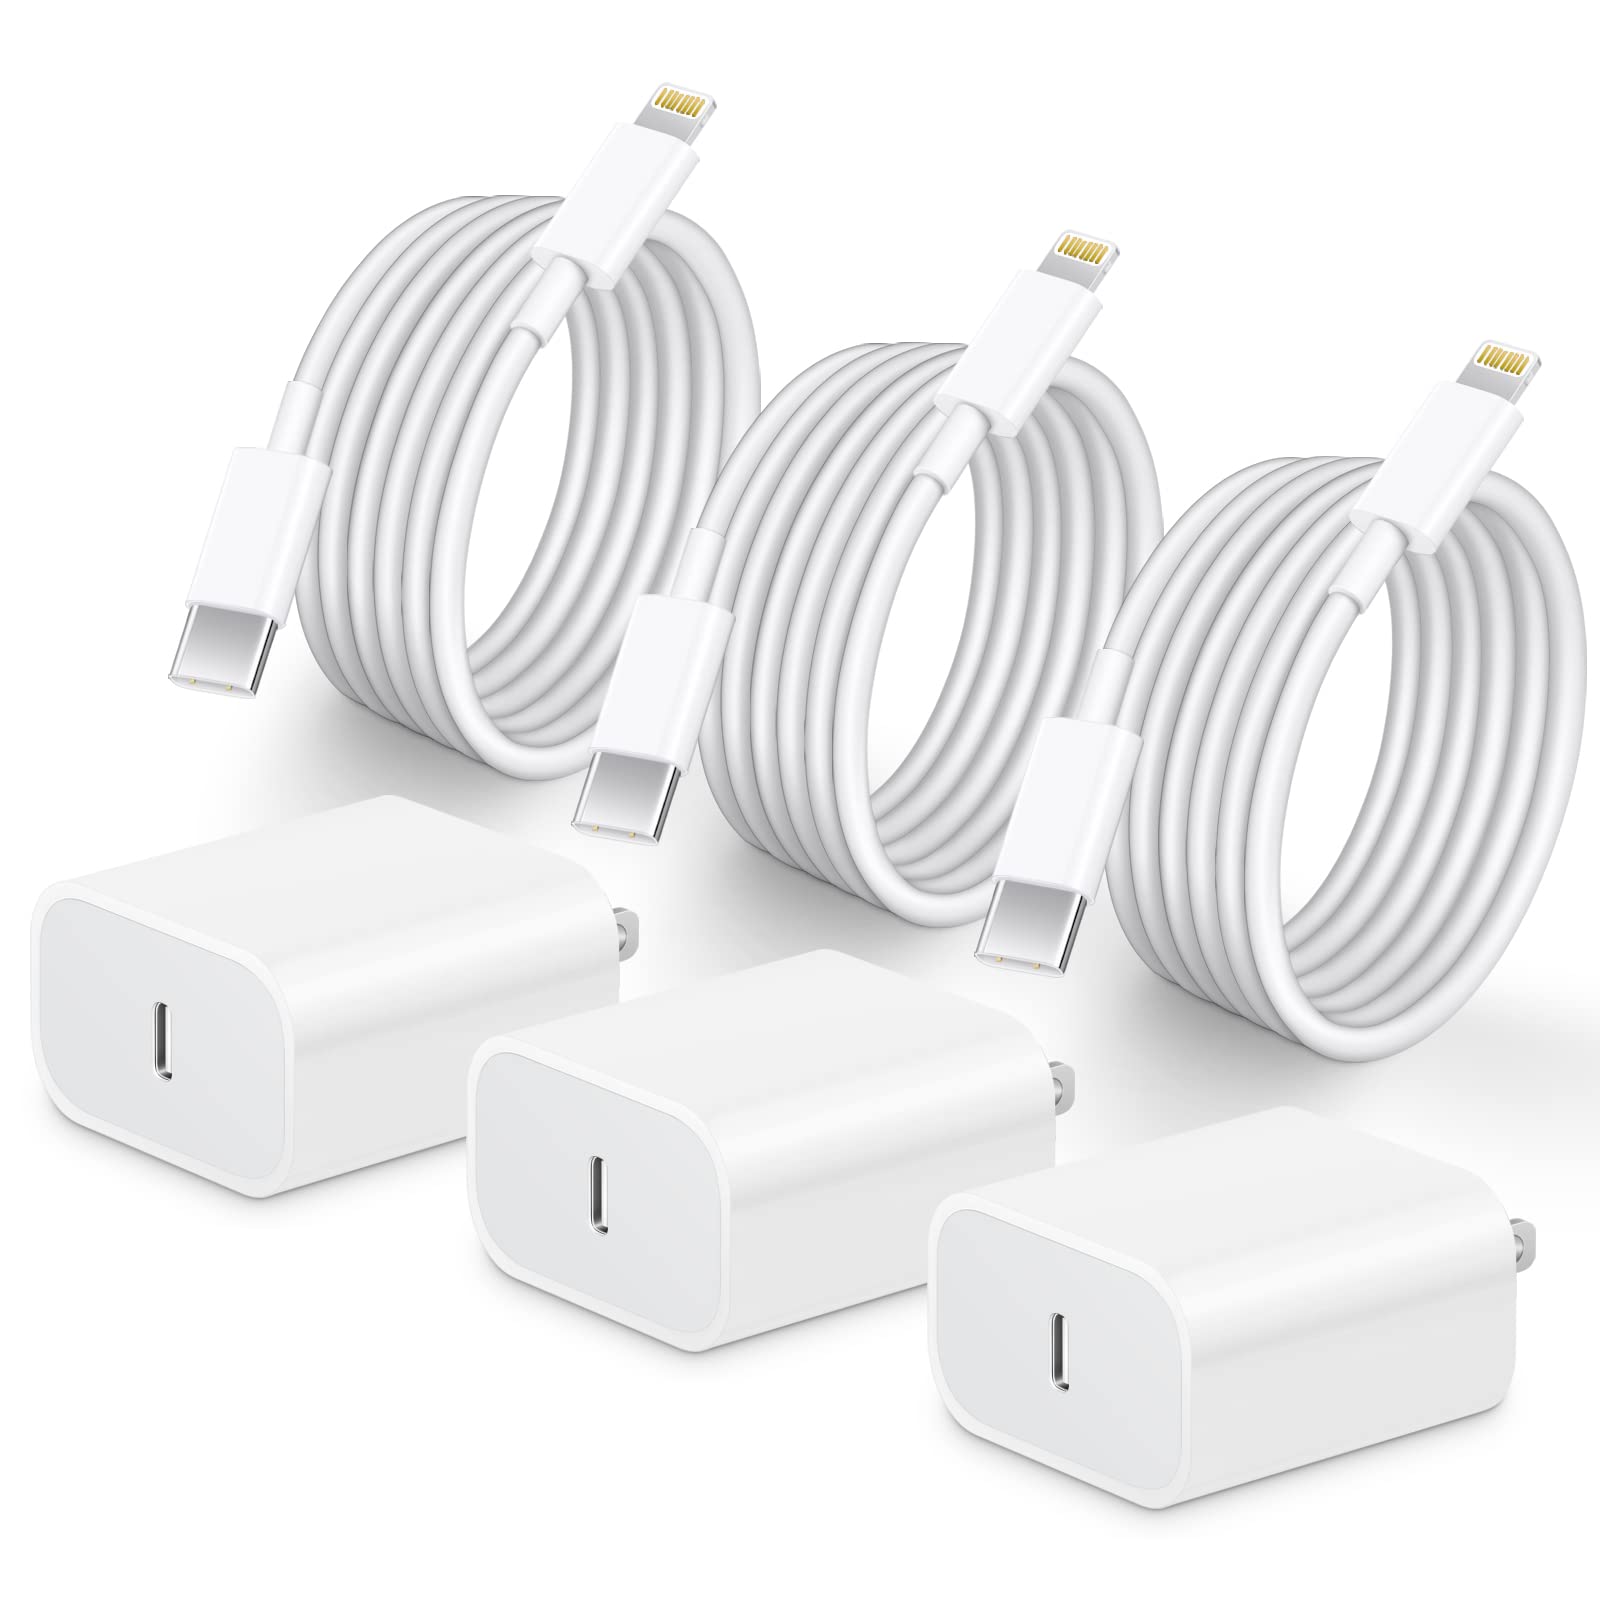 iPhone Charger, 3-Pack [MFi Certified] 20W PD USB C Fast Wall Charger with 6ft Lightning Cable, Apple Charging Cord for iPhone 14/14 Pro/13/13 Pro/12/12 Pro/11/Xs/XR/SE 2020/ iPad, and More